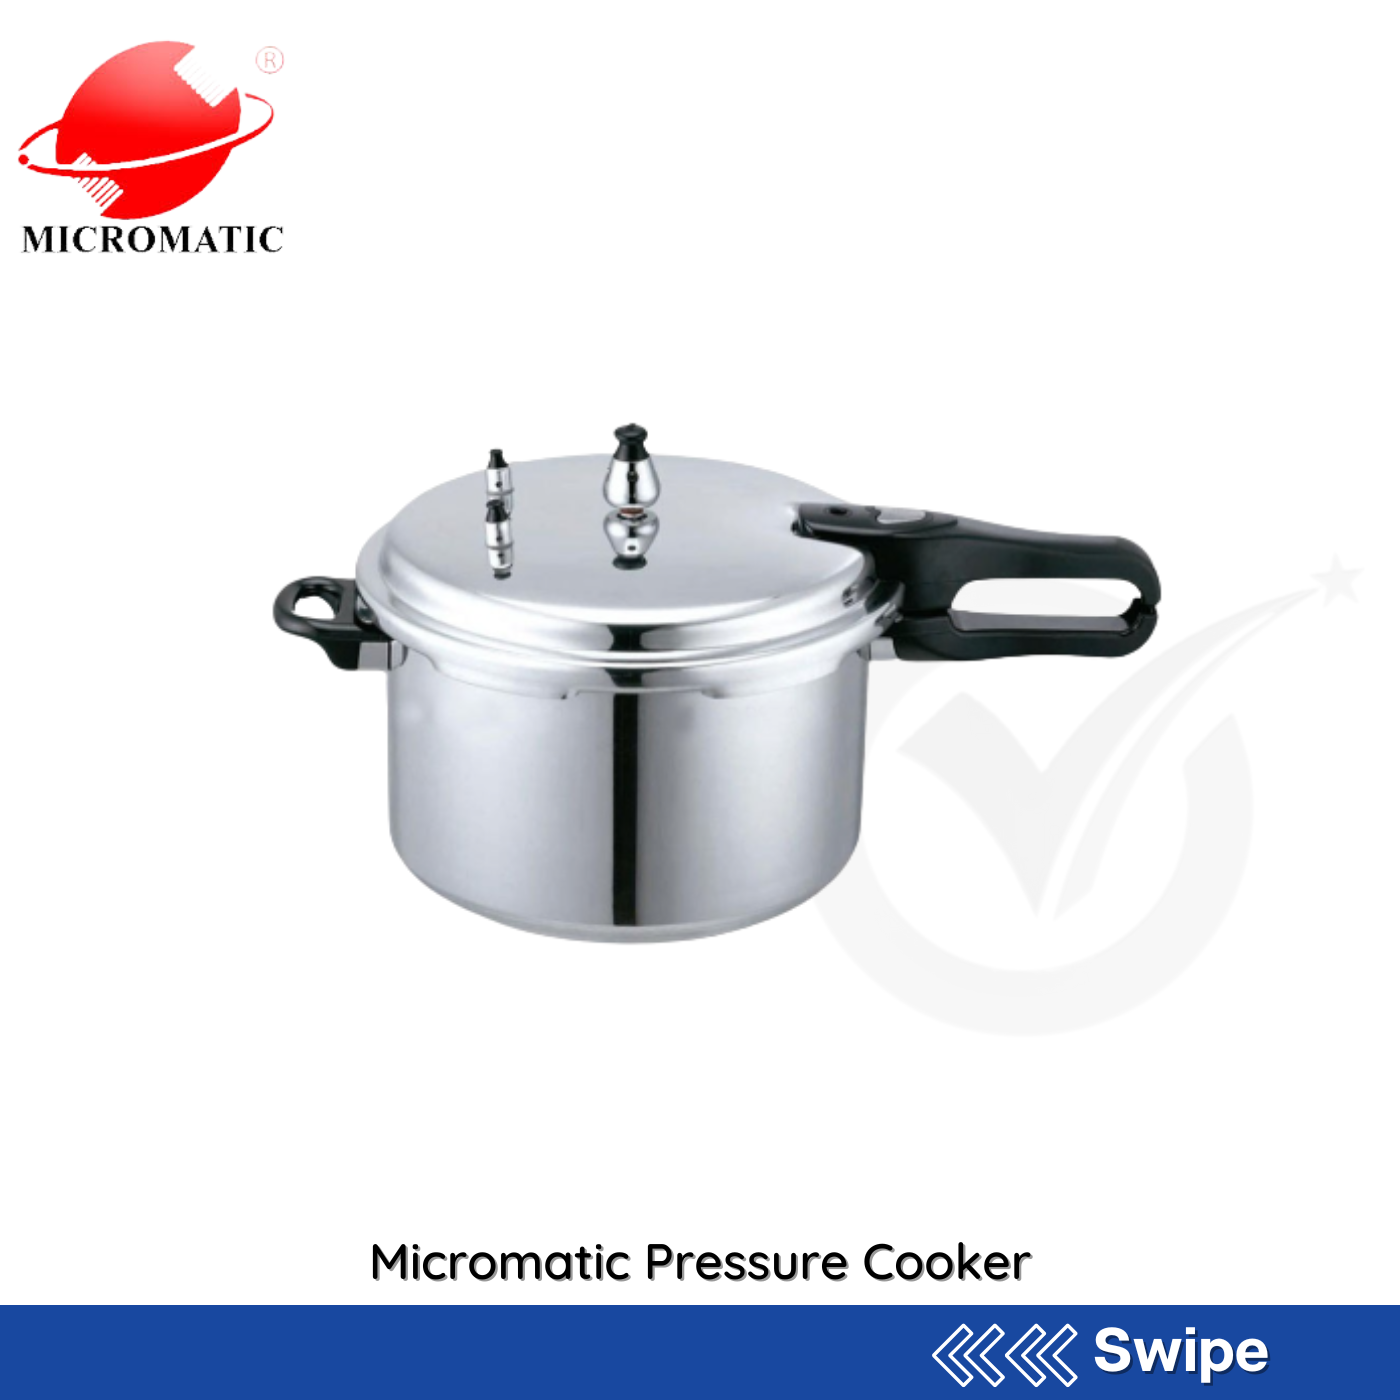 Micromatic Pressure Cooker - People's Choice Marketing